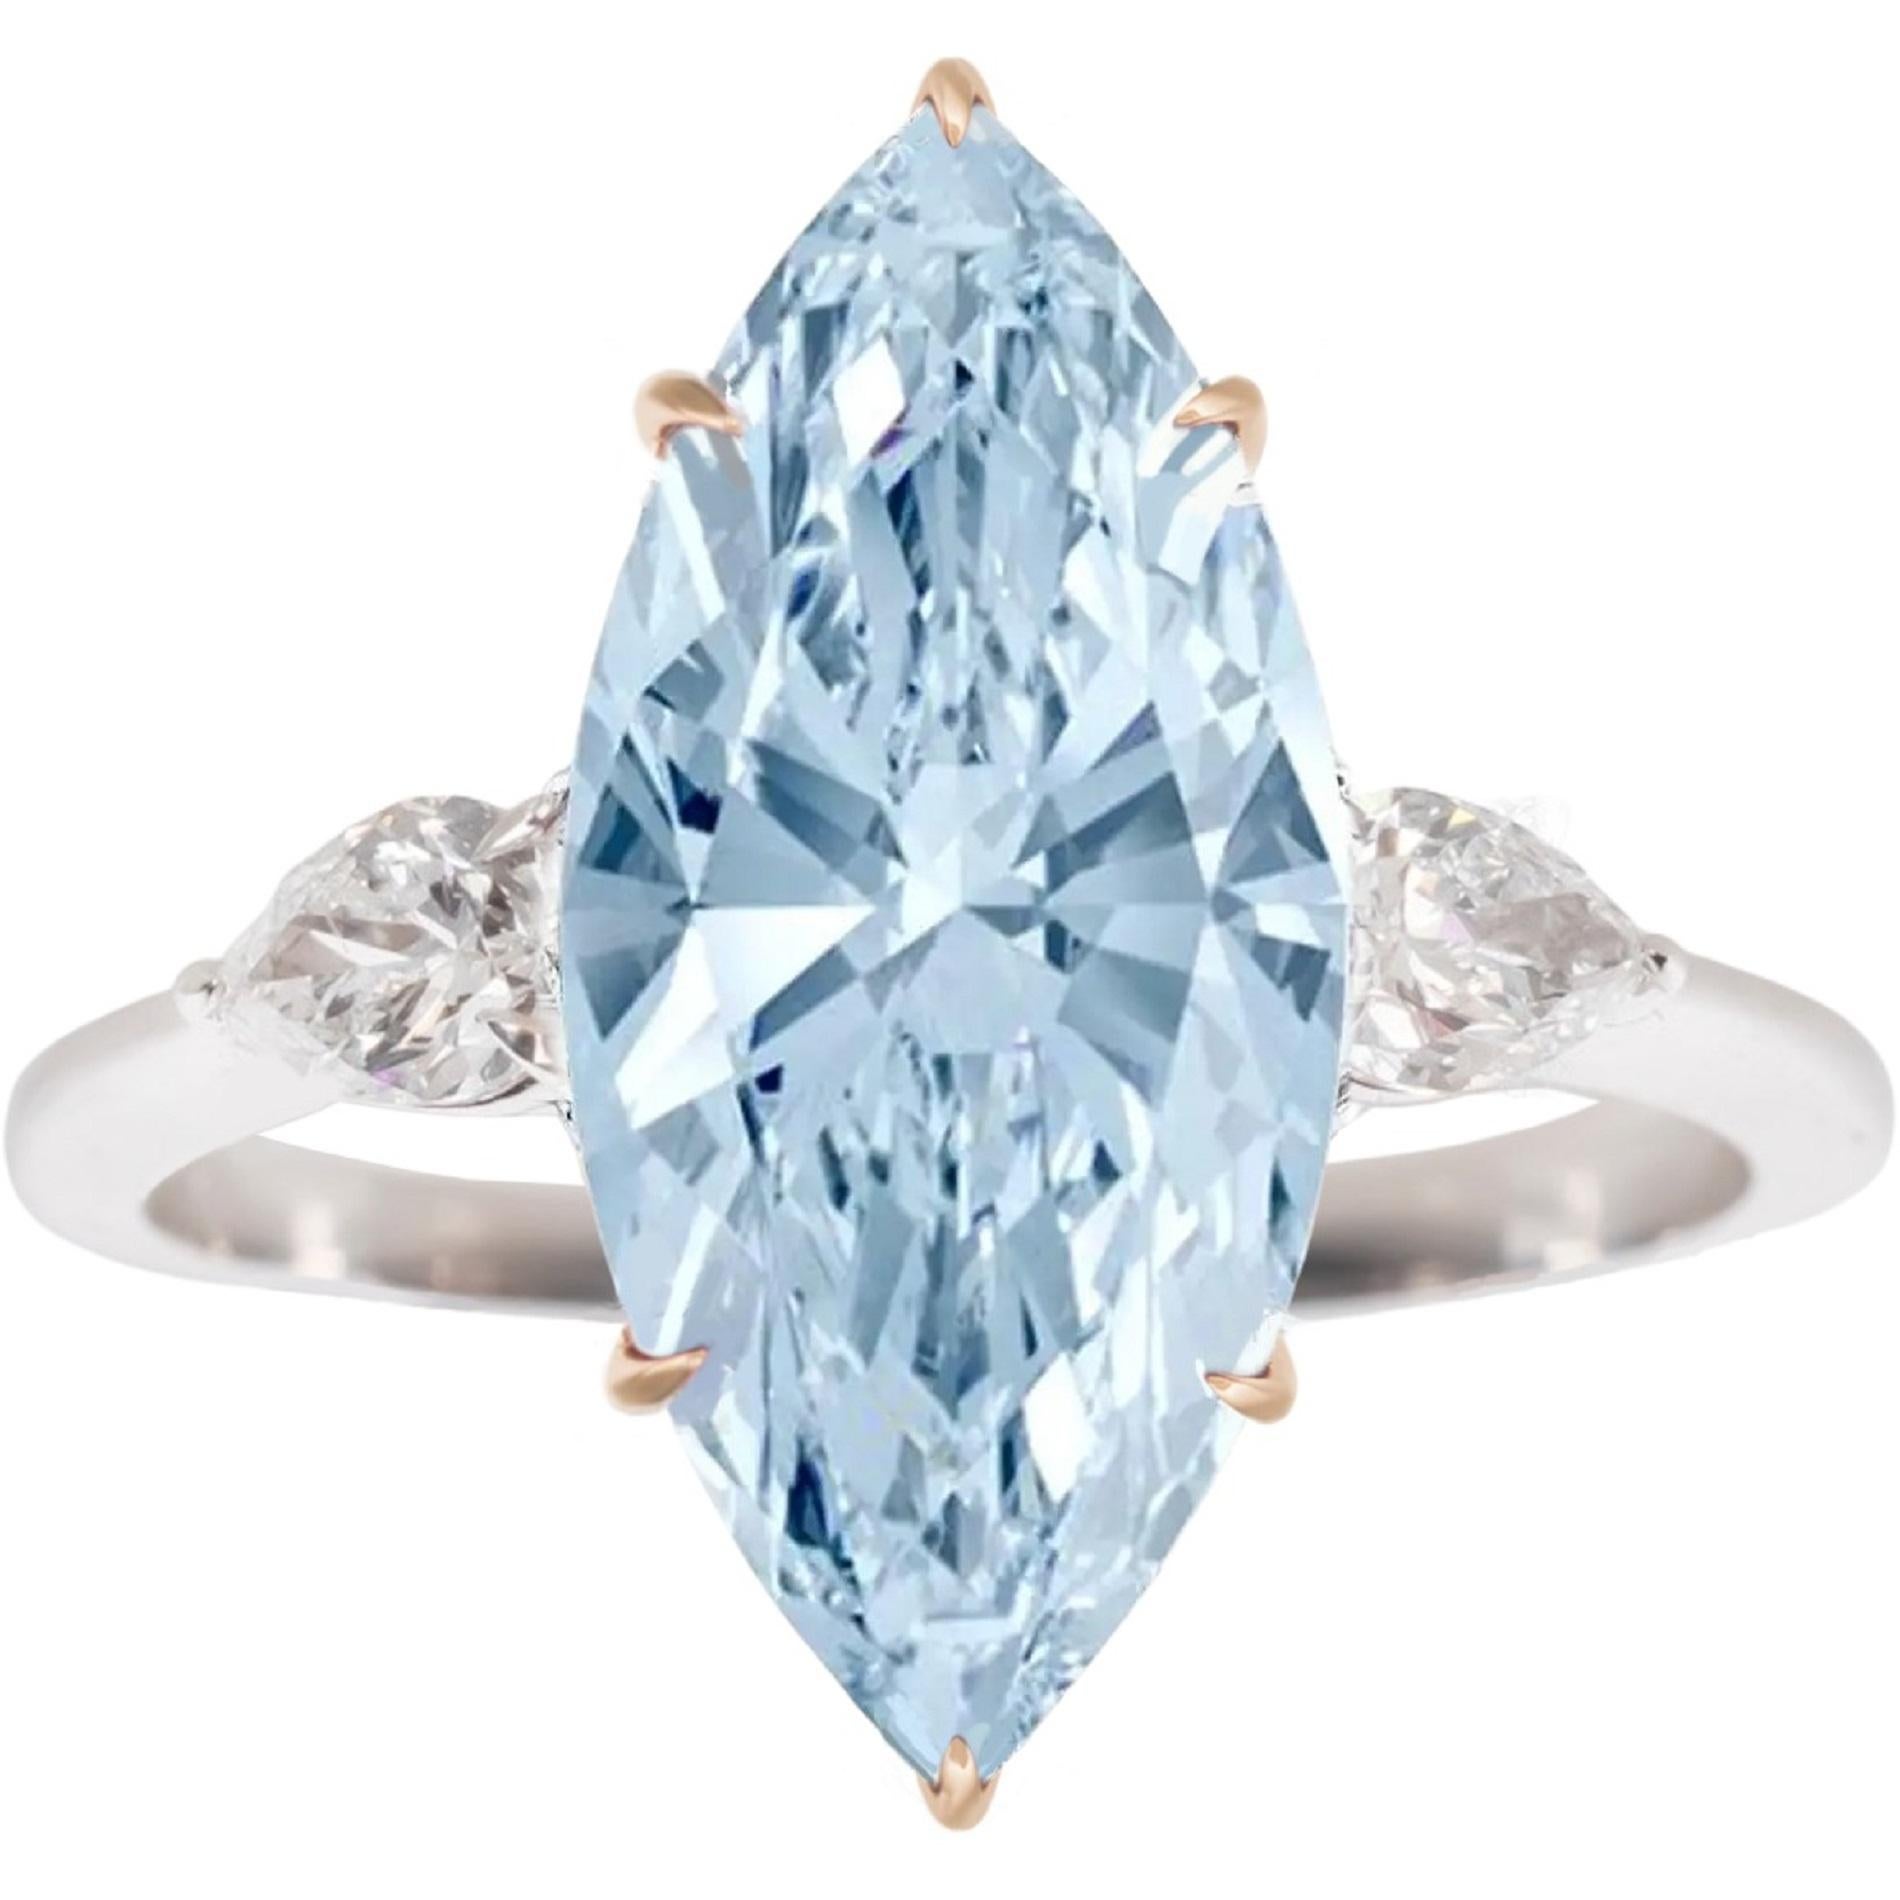 EXCEPTIONAL GIA Certified  Fancy Intense Blue Marquise Diamond

Colored diamonds are bought as a long-term investment, meaning they are kept out of the market for lengthy periods.

this diamond is one of a kind considering is extremely rare and